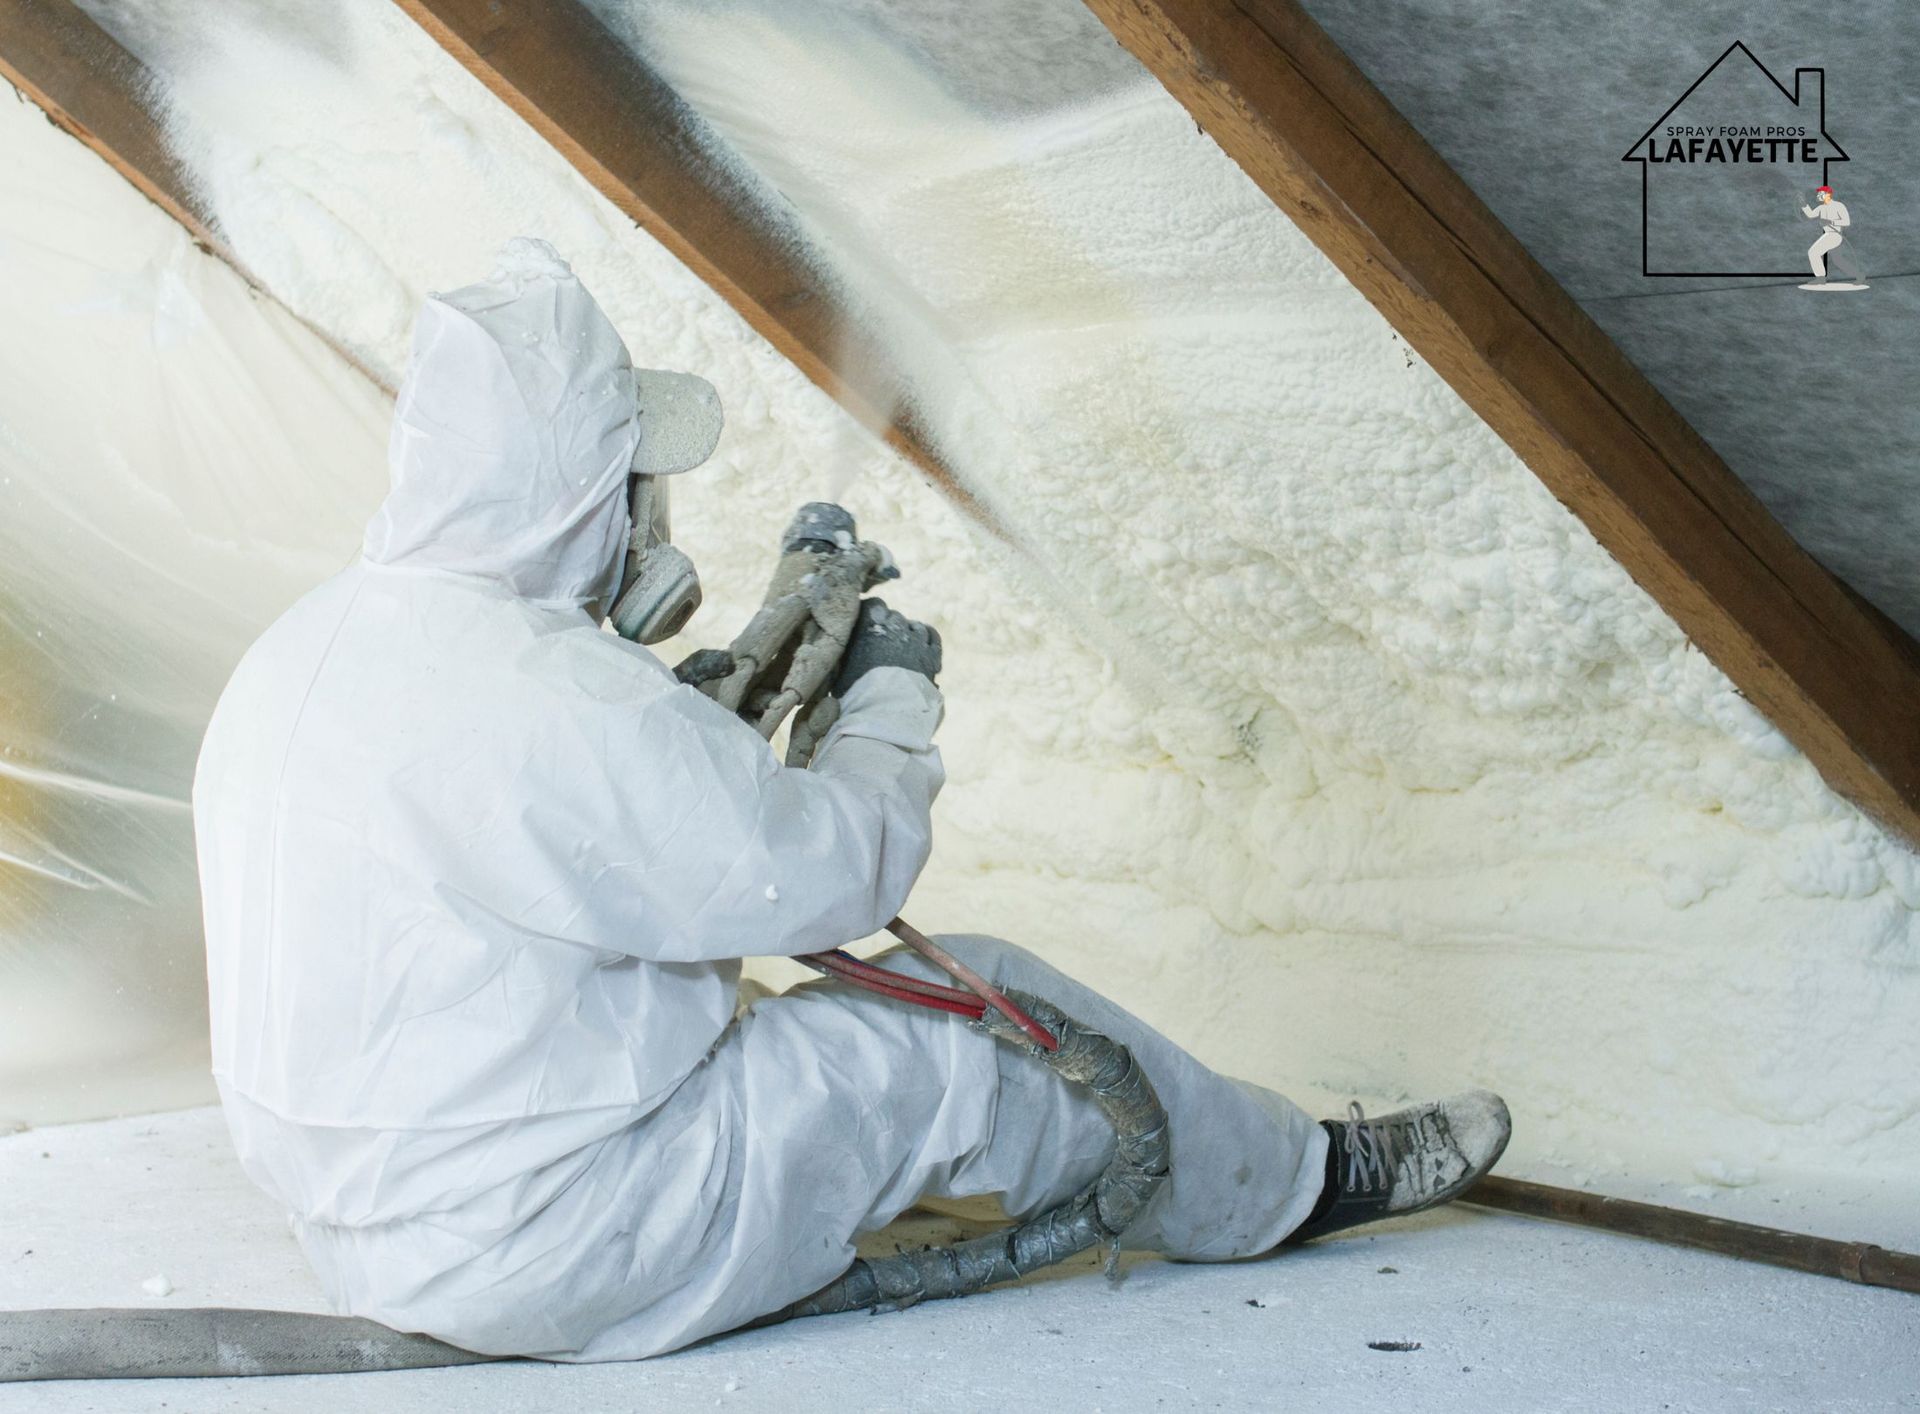 insulating an existing home with spray foam in Lafayette LA